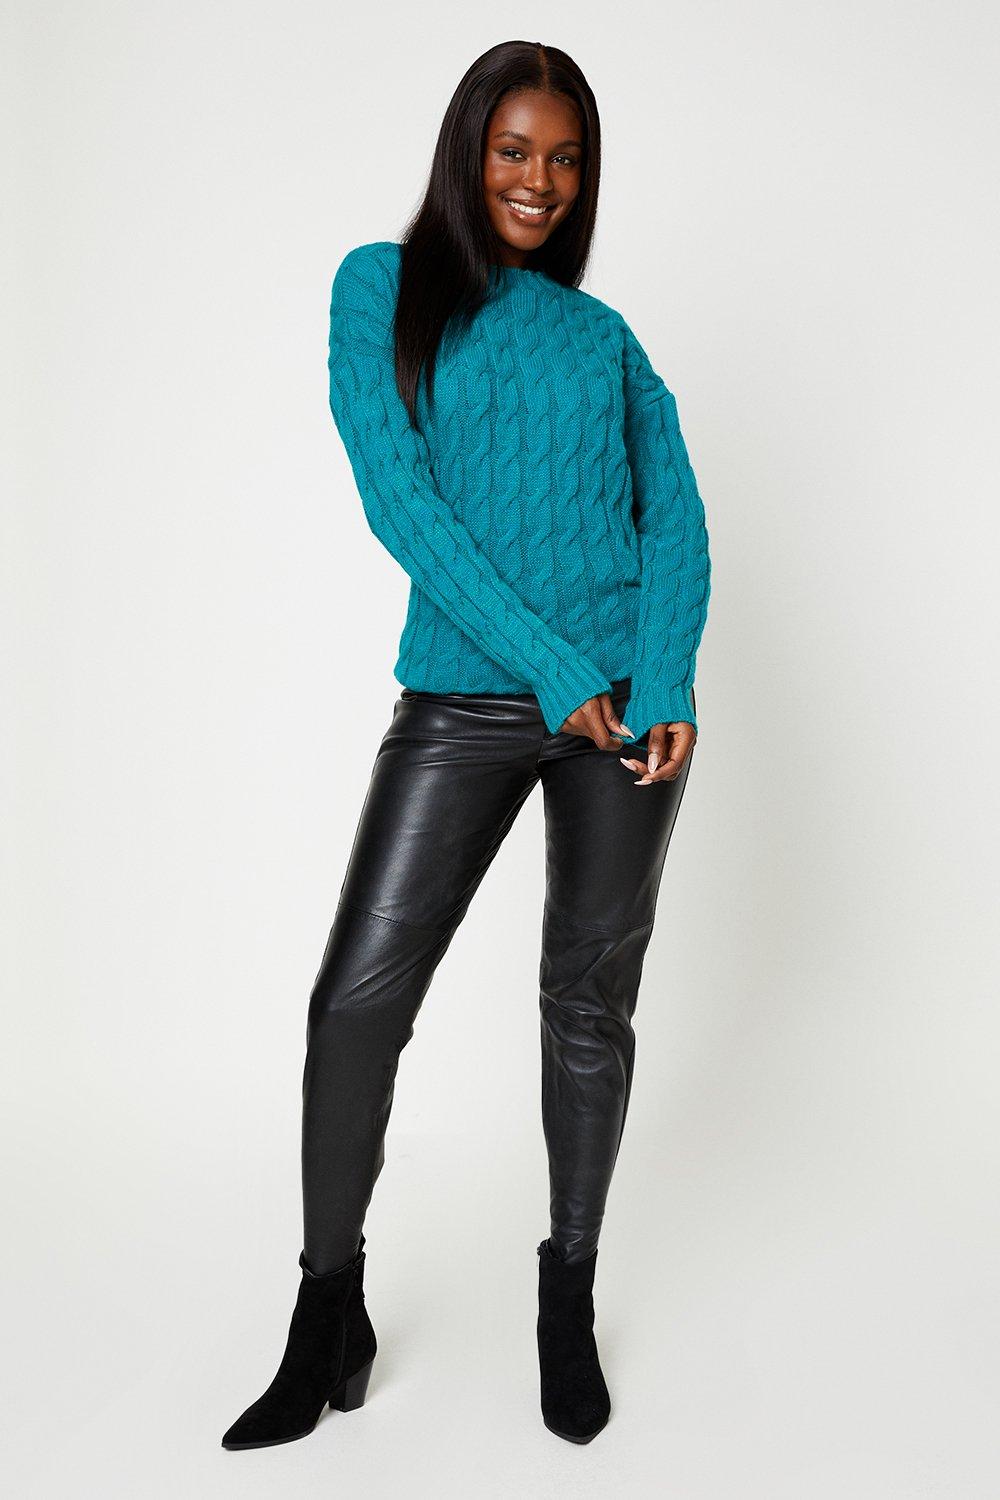 Women’s Long Sleeve Cable Knit Jumper - green - S